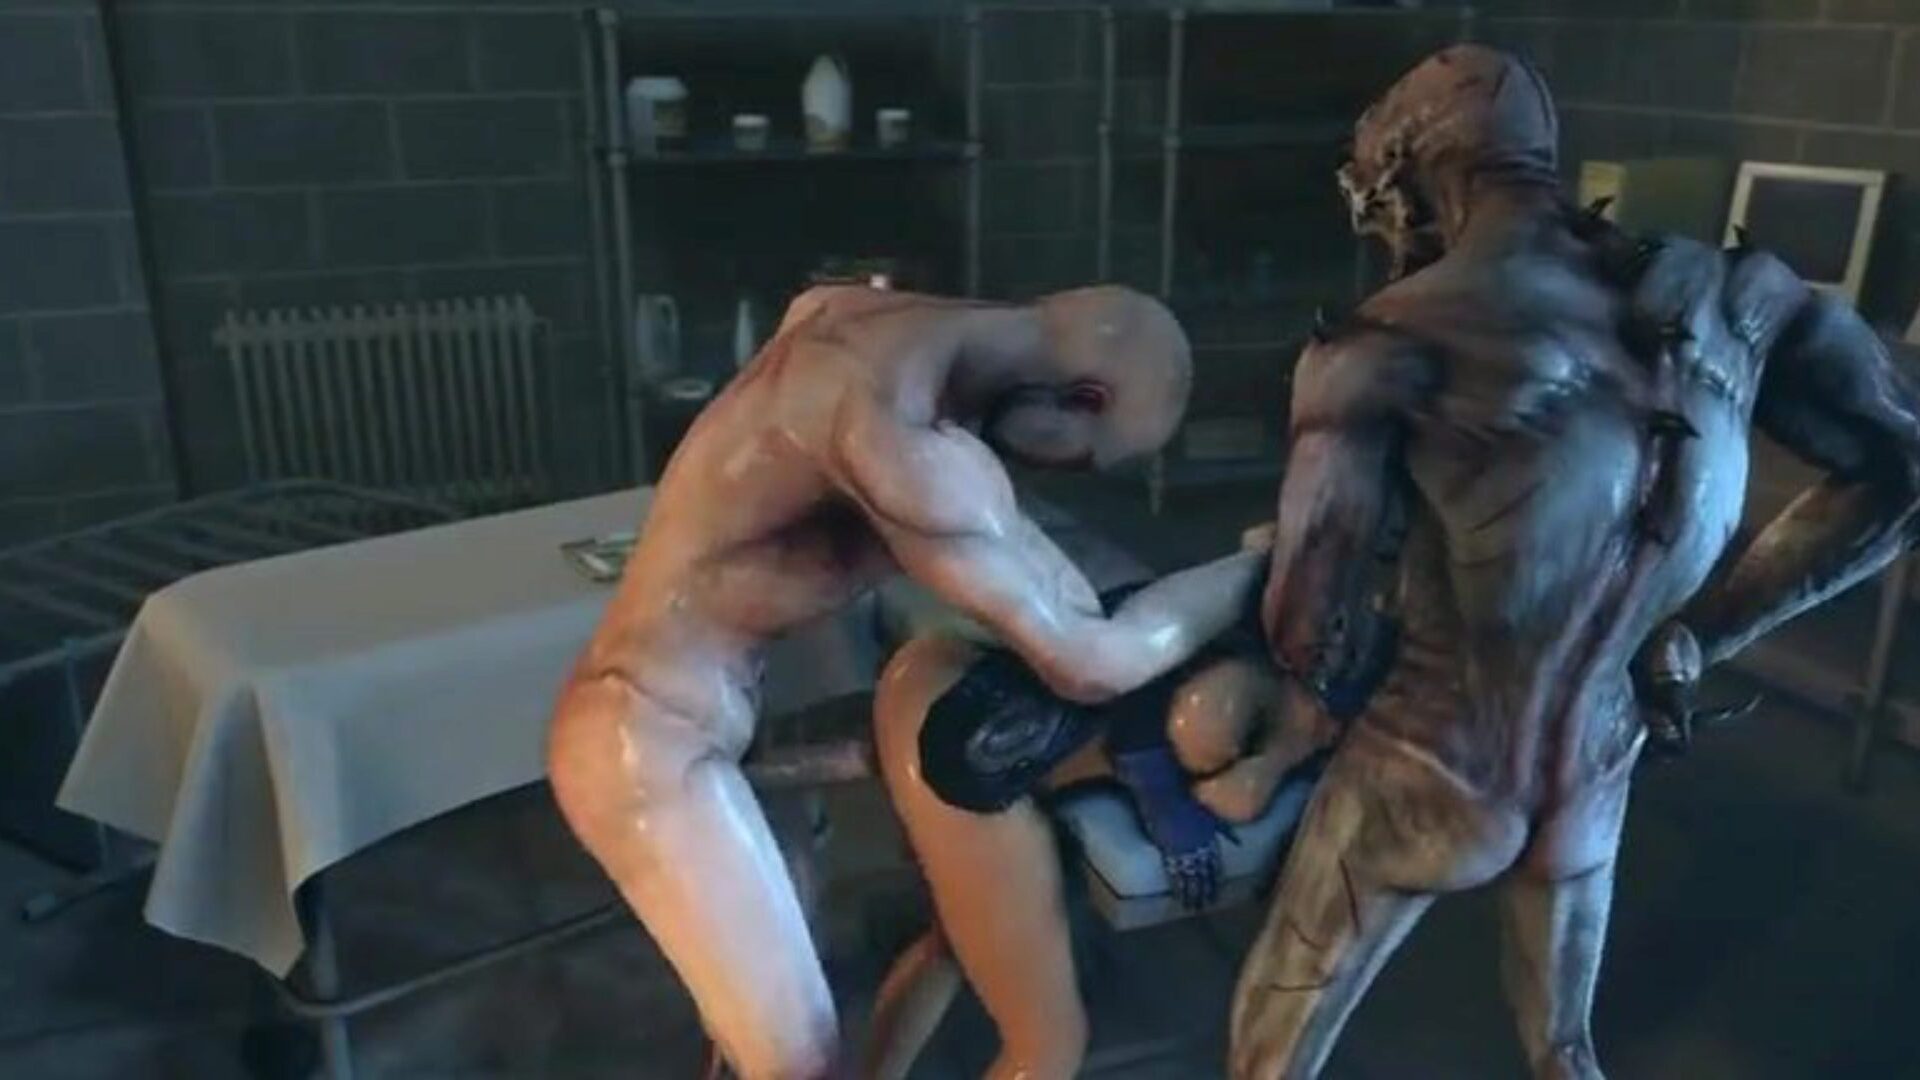 ashley and femshep getting banged by monsters sexy